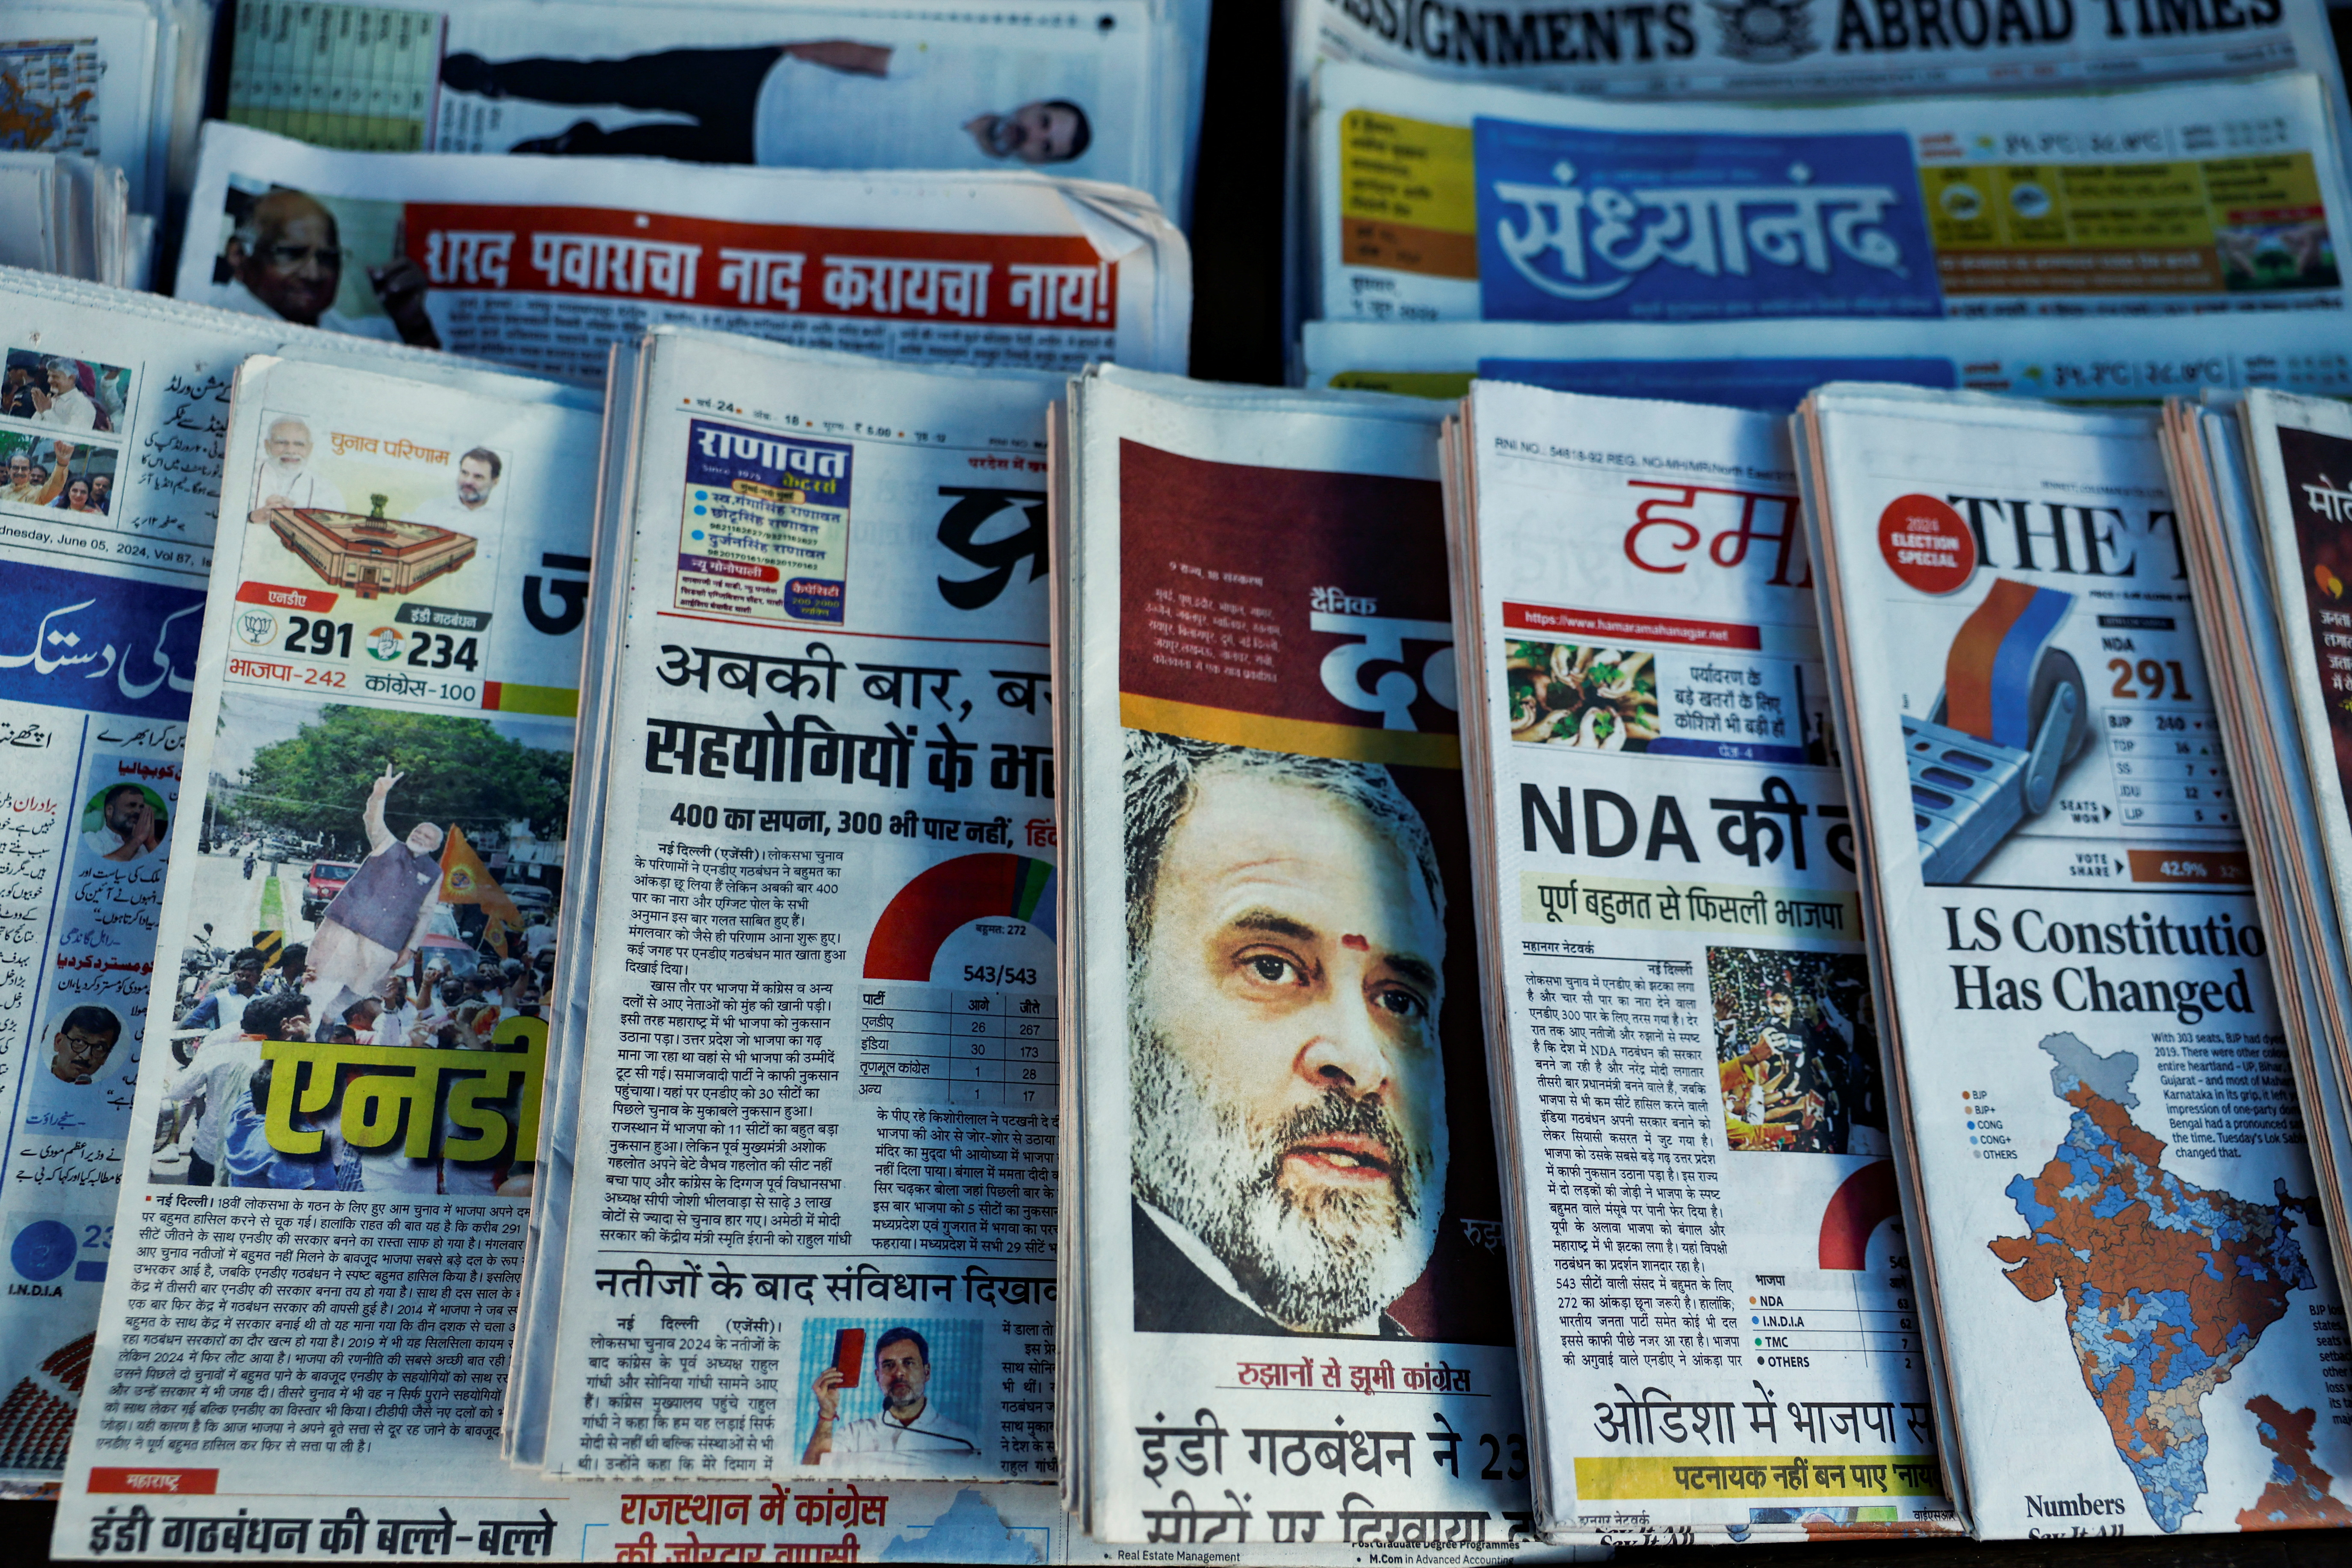 Newspapers are displayed at a stall following the results of India's general election, in Mumbai